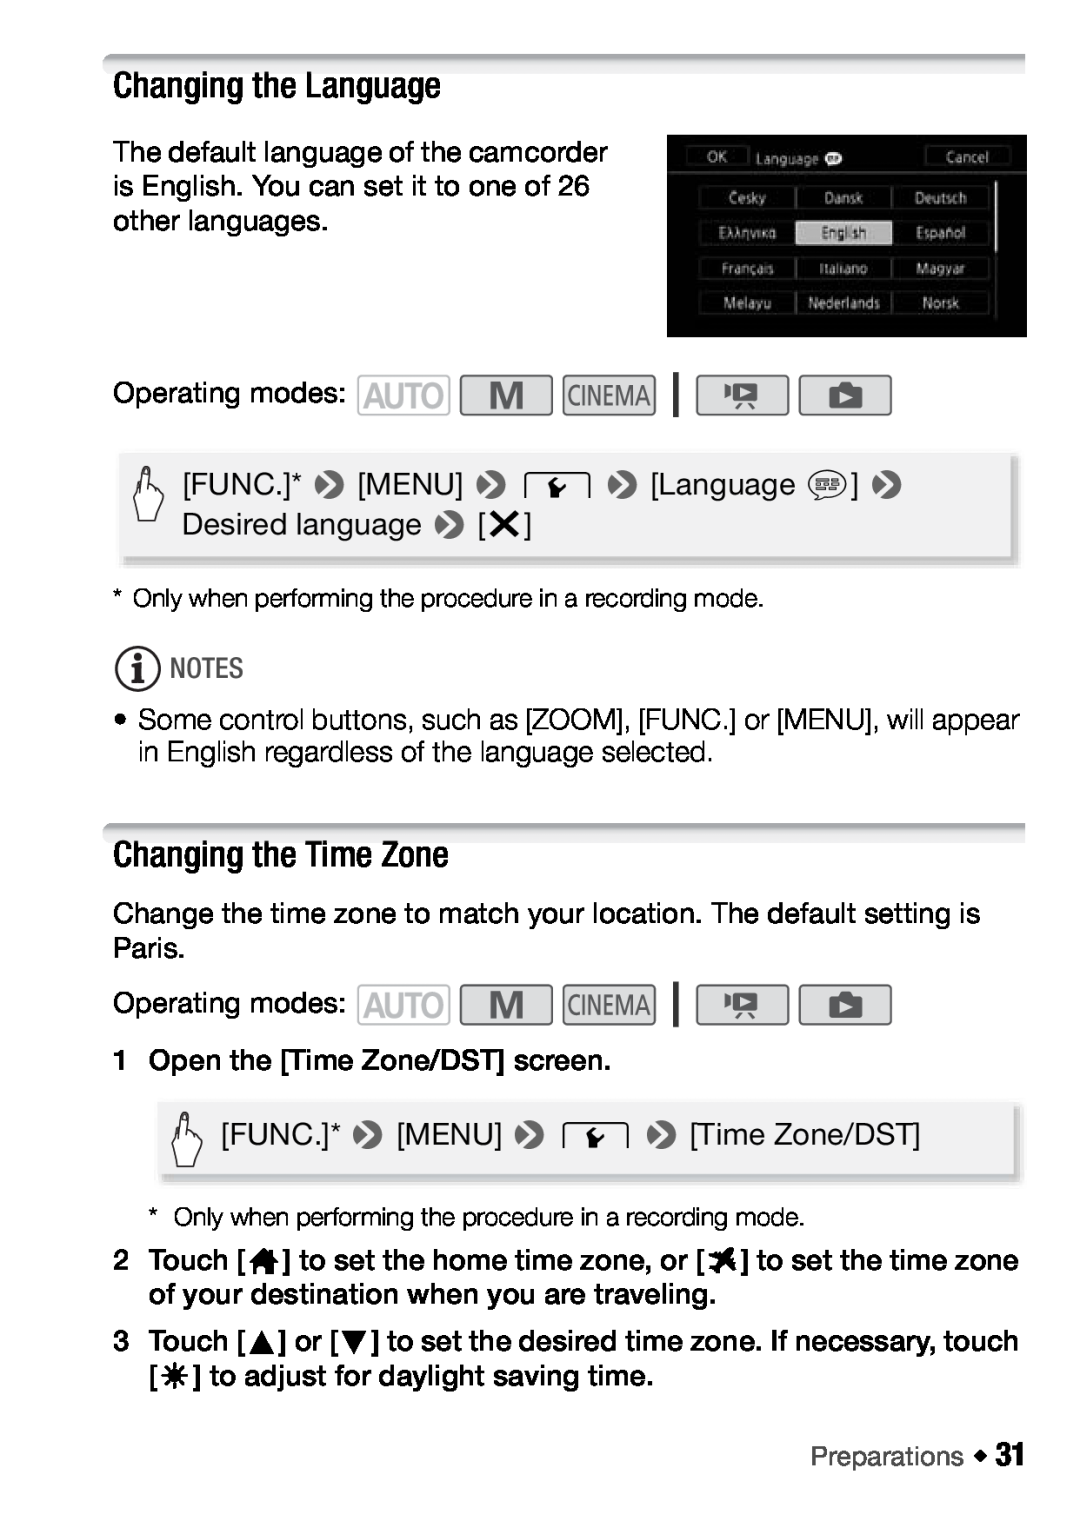 Canon HFM46, HFM406 instruction manual Changing the Language, Changing the Time Zone 